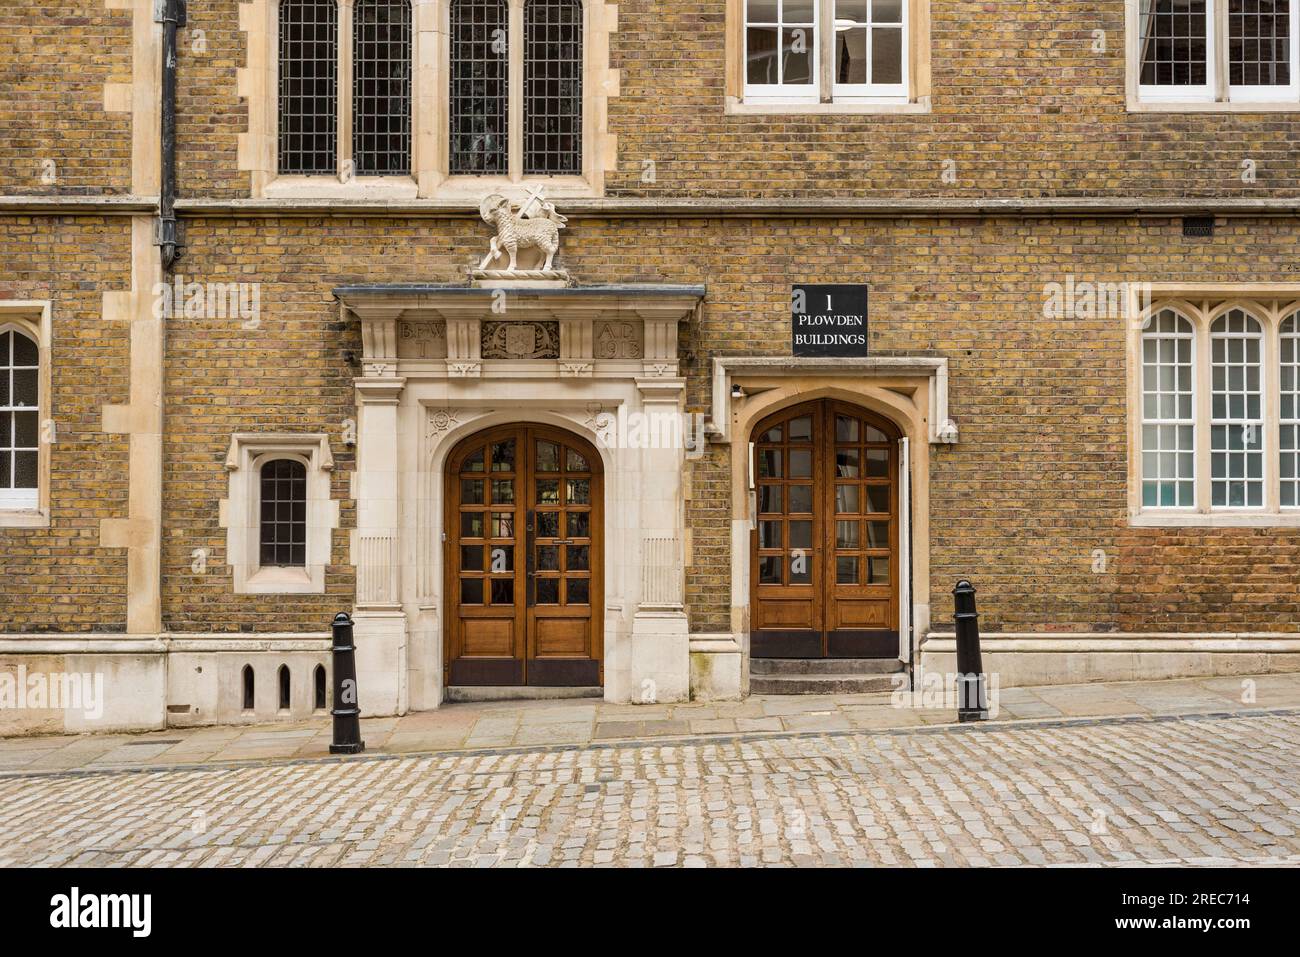 Plowden Buildings in Middle Temple Lane, London, UK Stock Photo